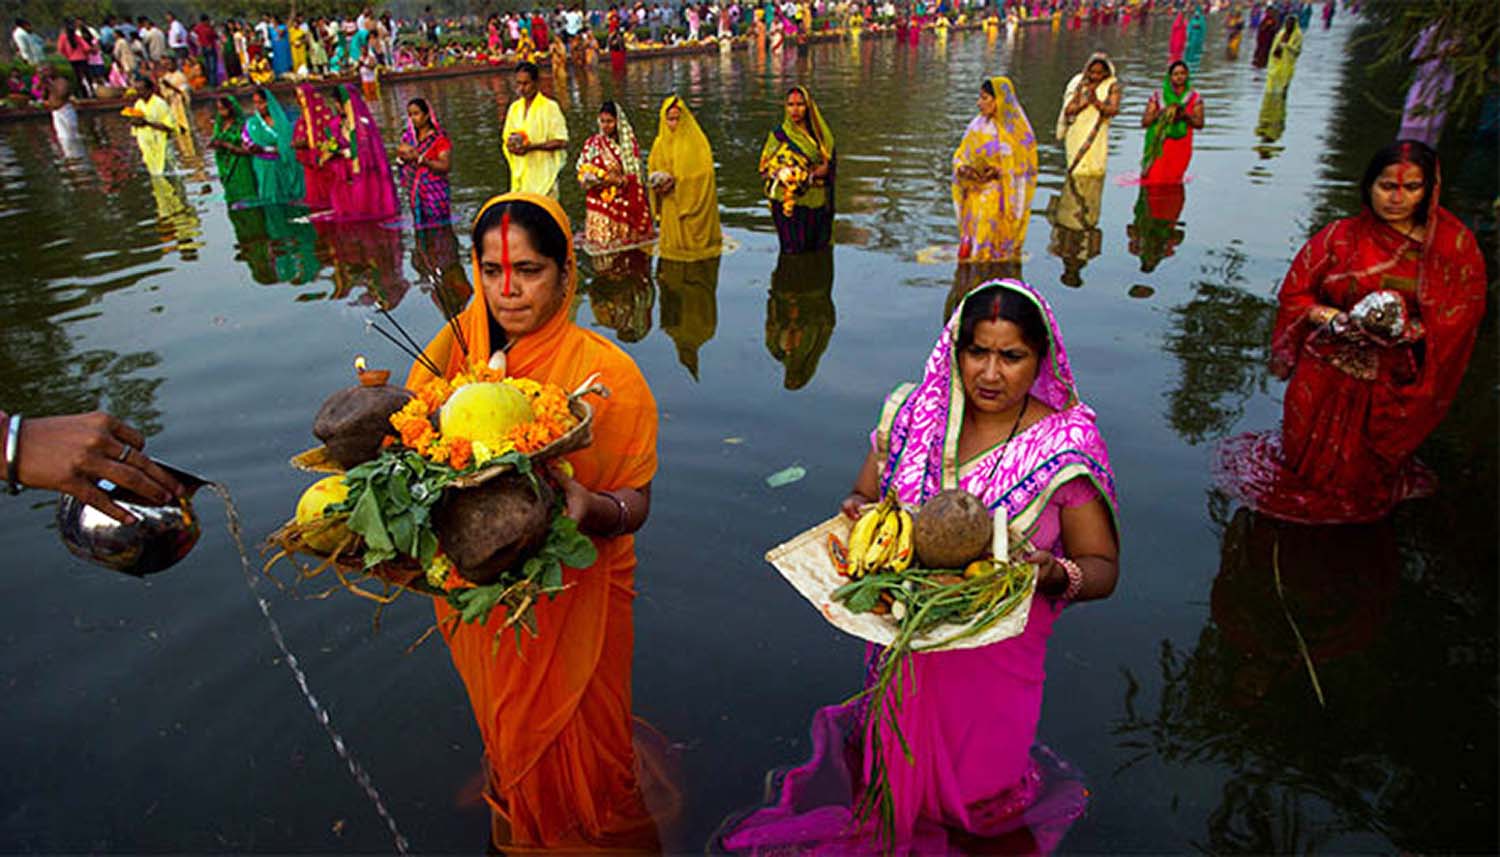 34 BEST Happy Chhath Puja Image Photos Pictures  Wishes